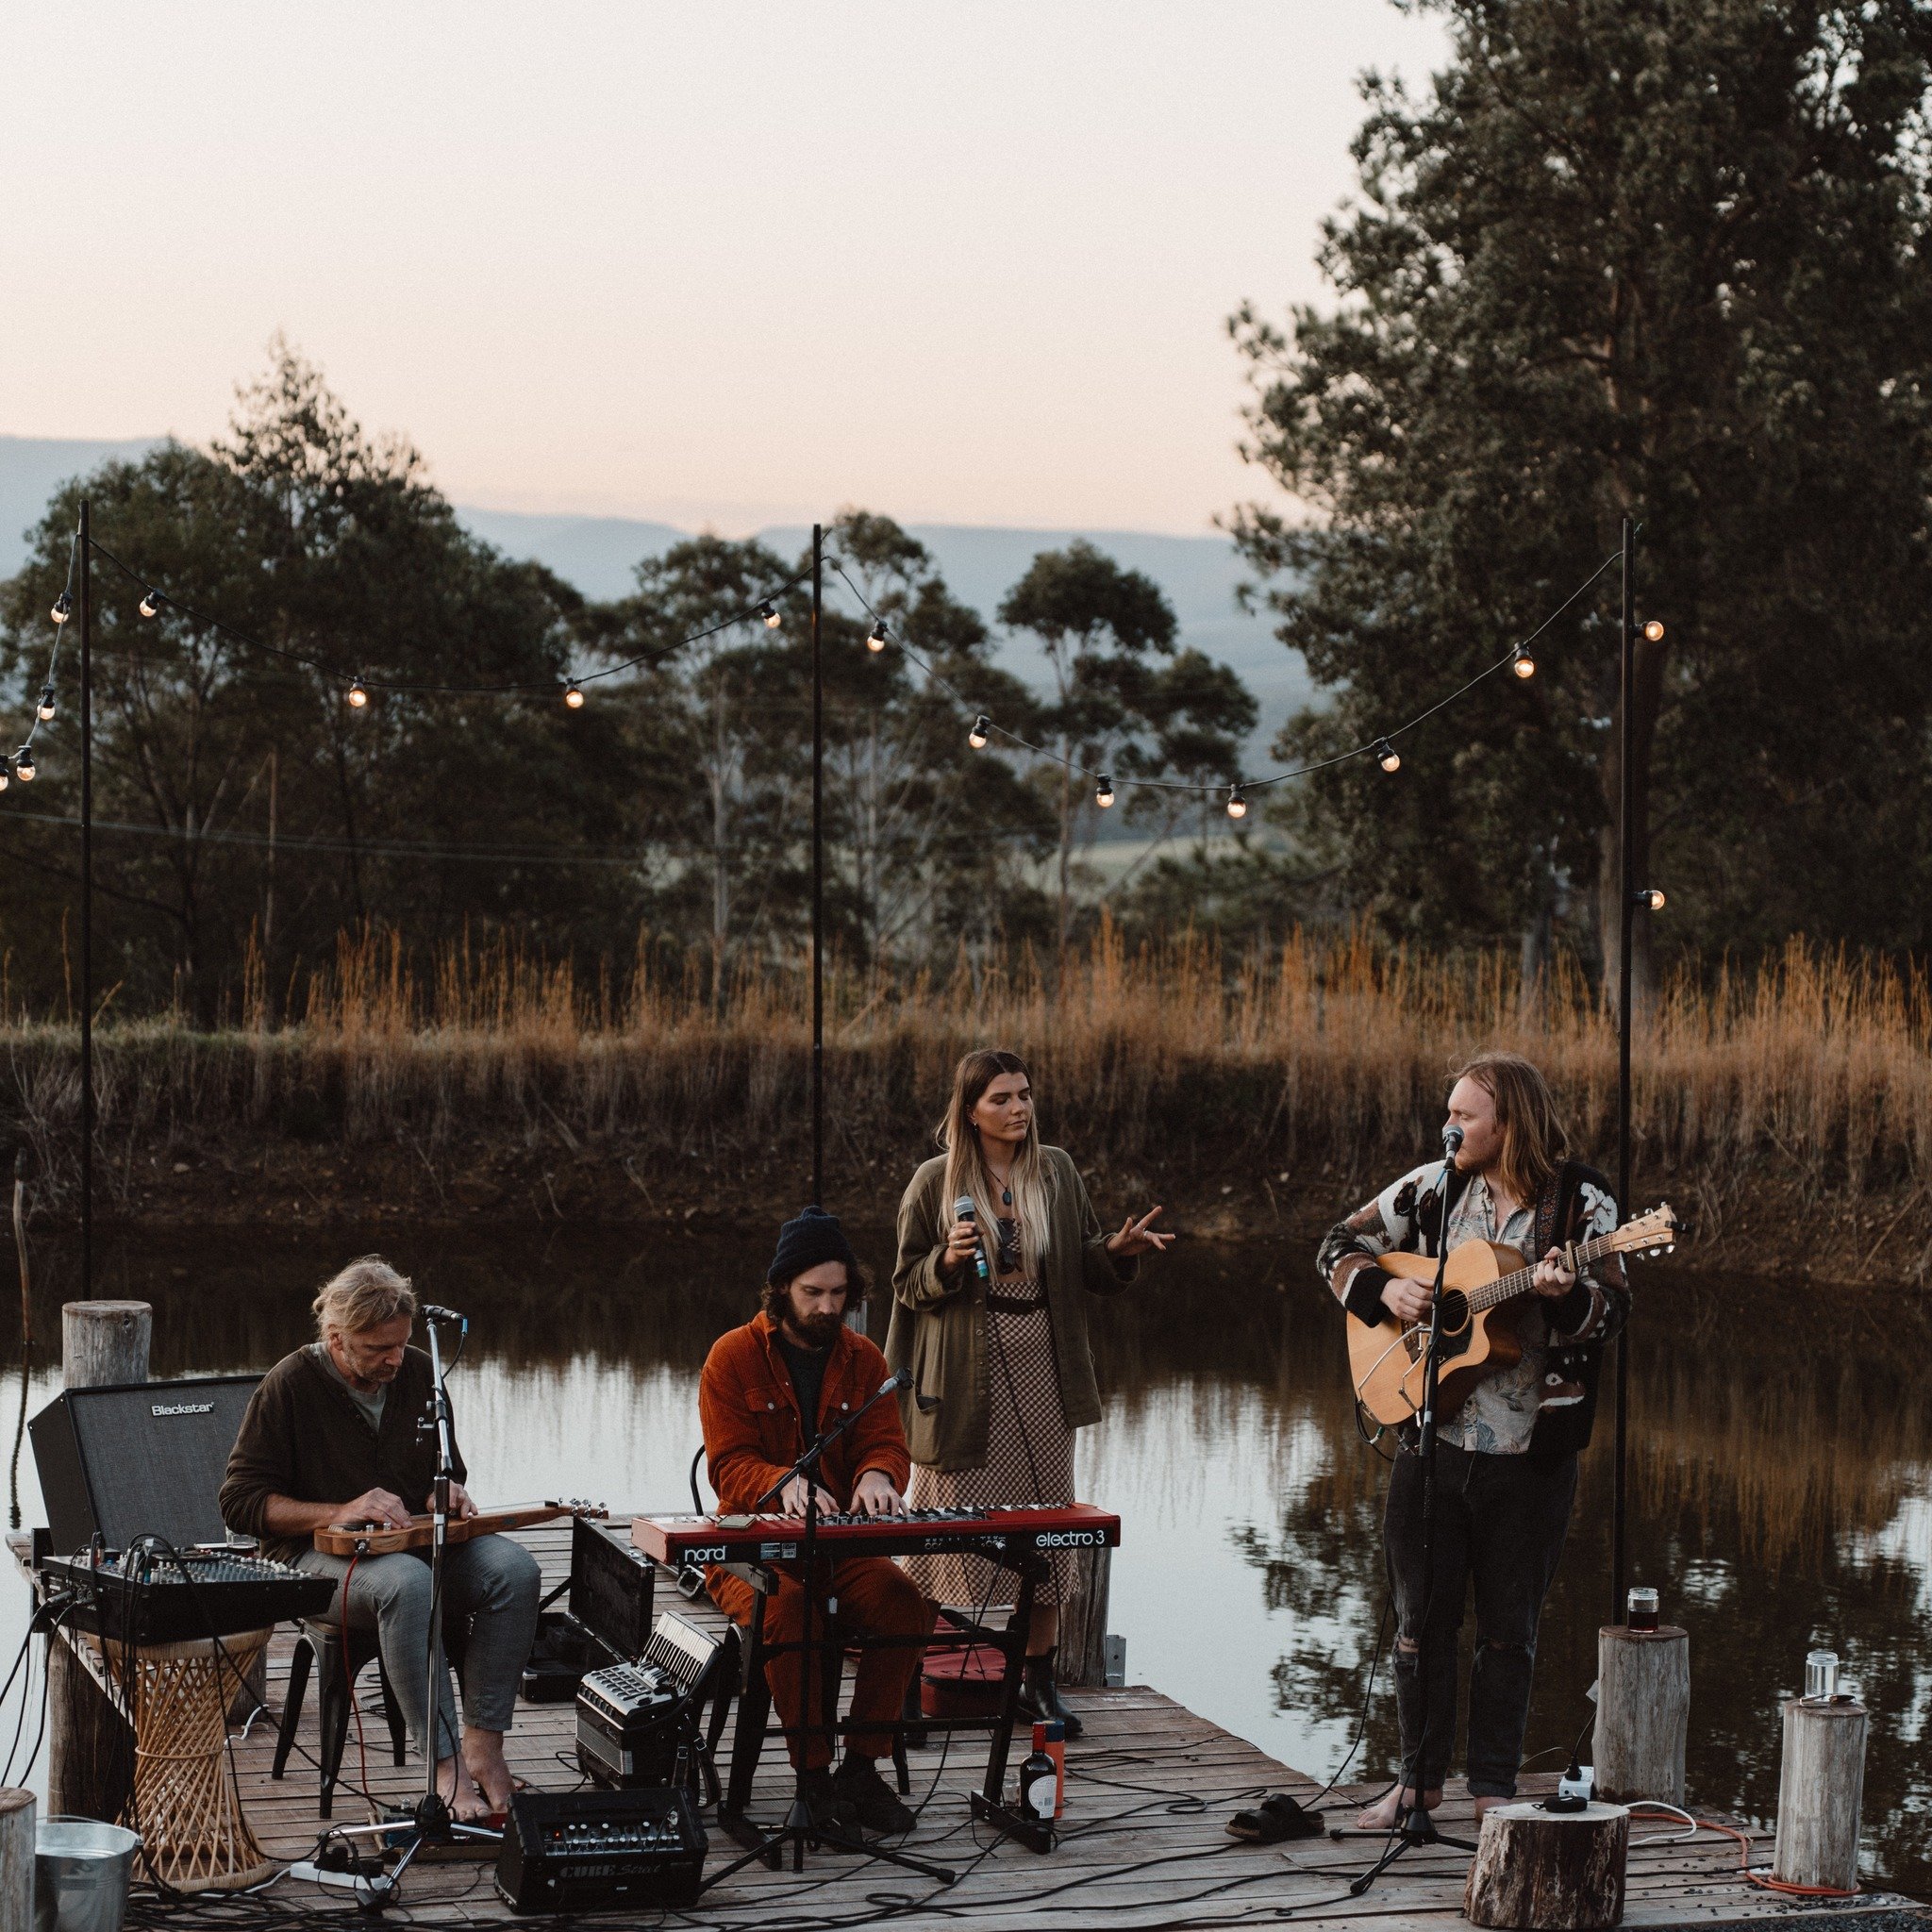 @sturtavenue / @bromhammusic's new single 'How Much It Costs' came out yesterday 💰

The inspiration behind this new track stems from a profound reflection on the human condition. Recorded in their home studio setup nestled in the Adelaide hills, the